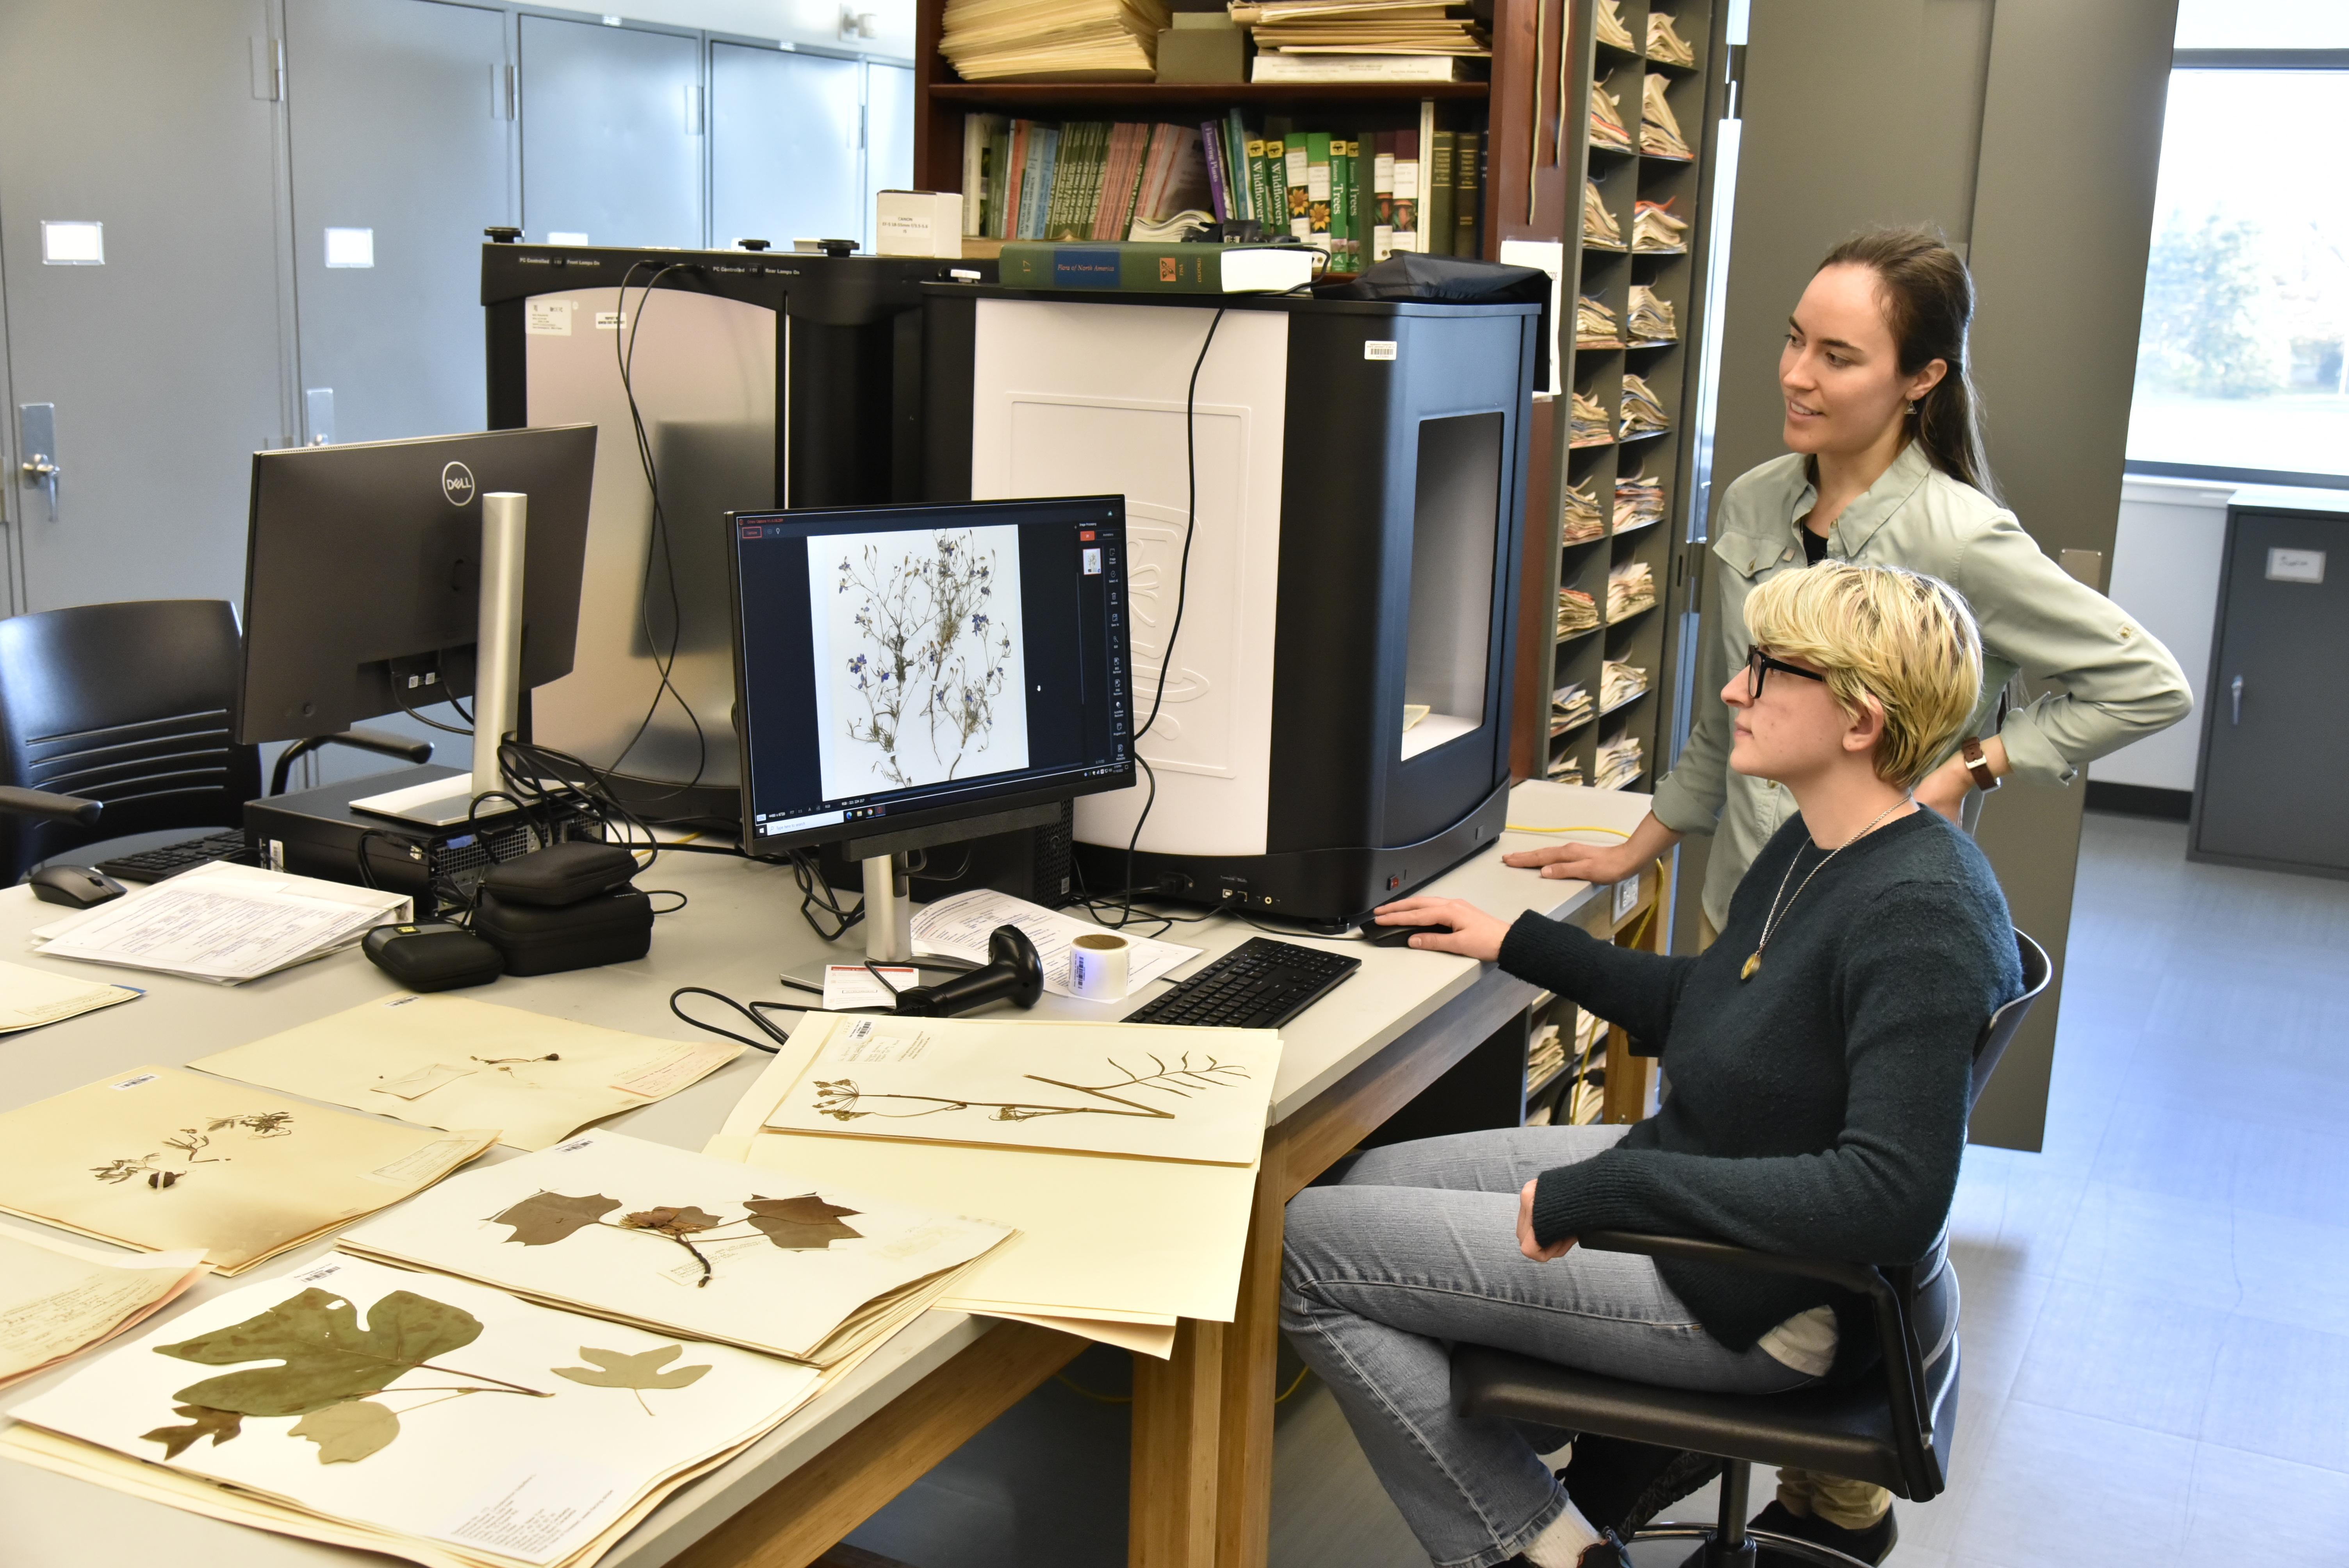 The SUNY Oswego herbarium is providing hands-on opportunities for student researchers helping preserve and provide access to a vast collection